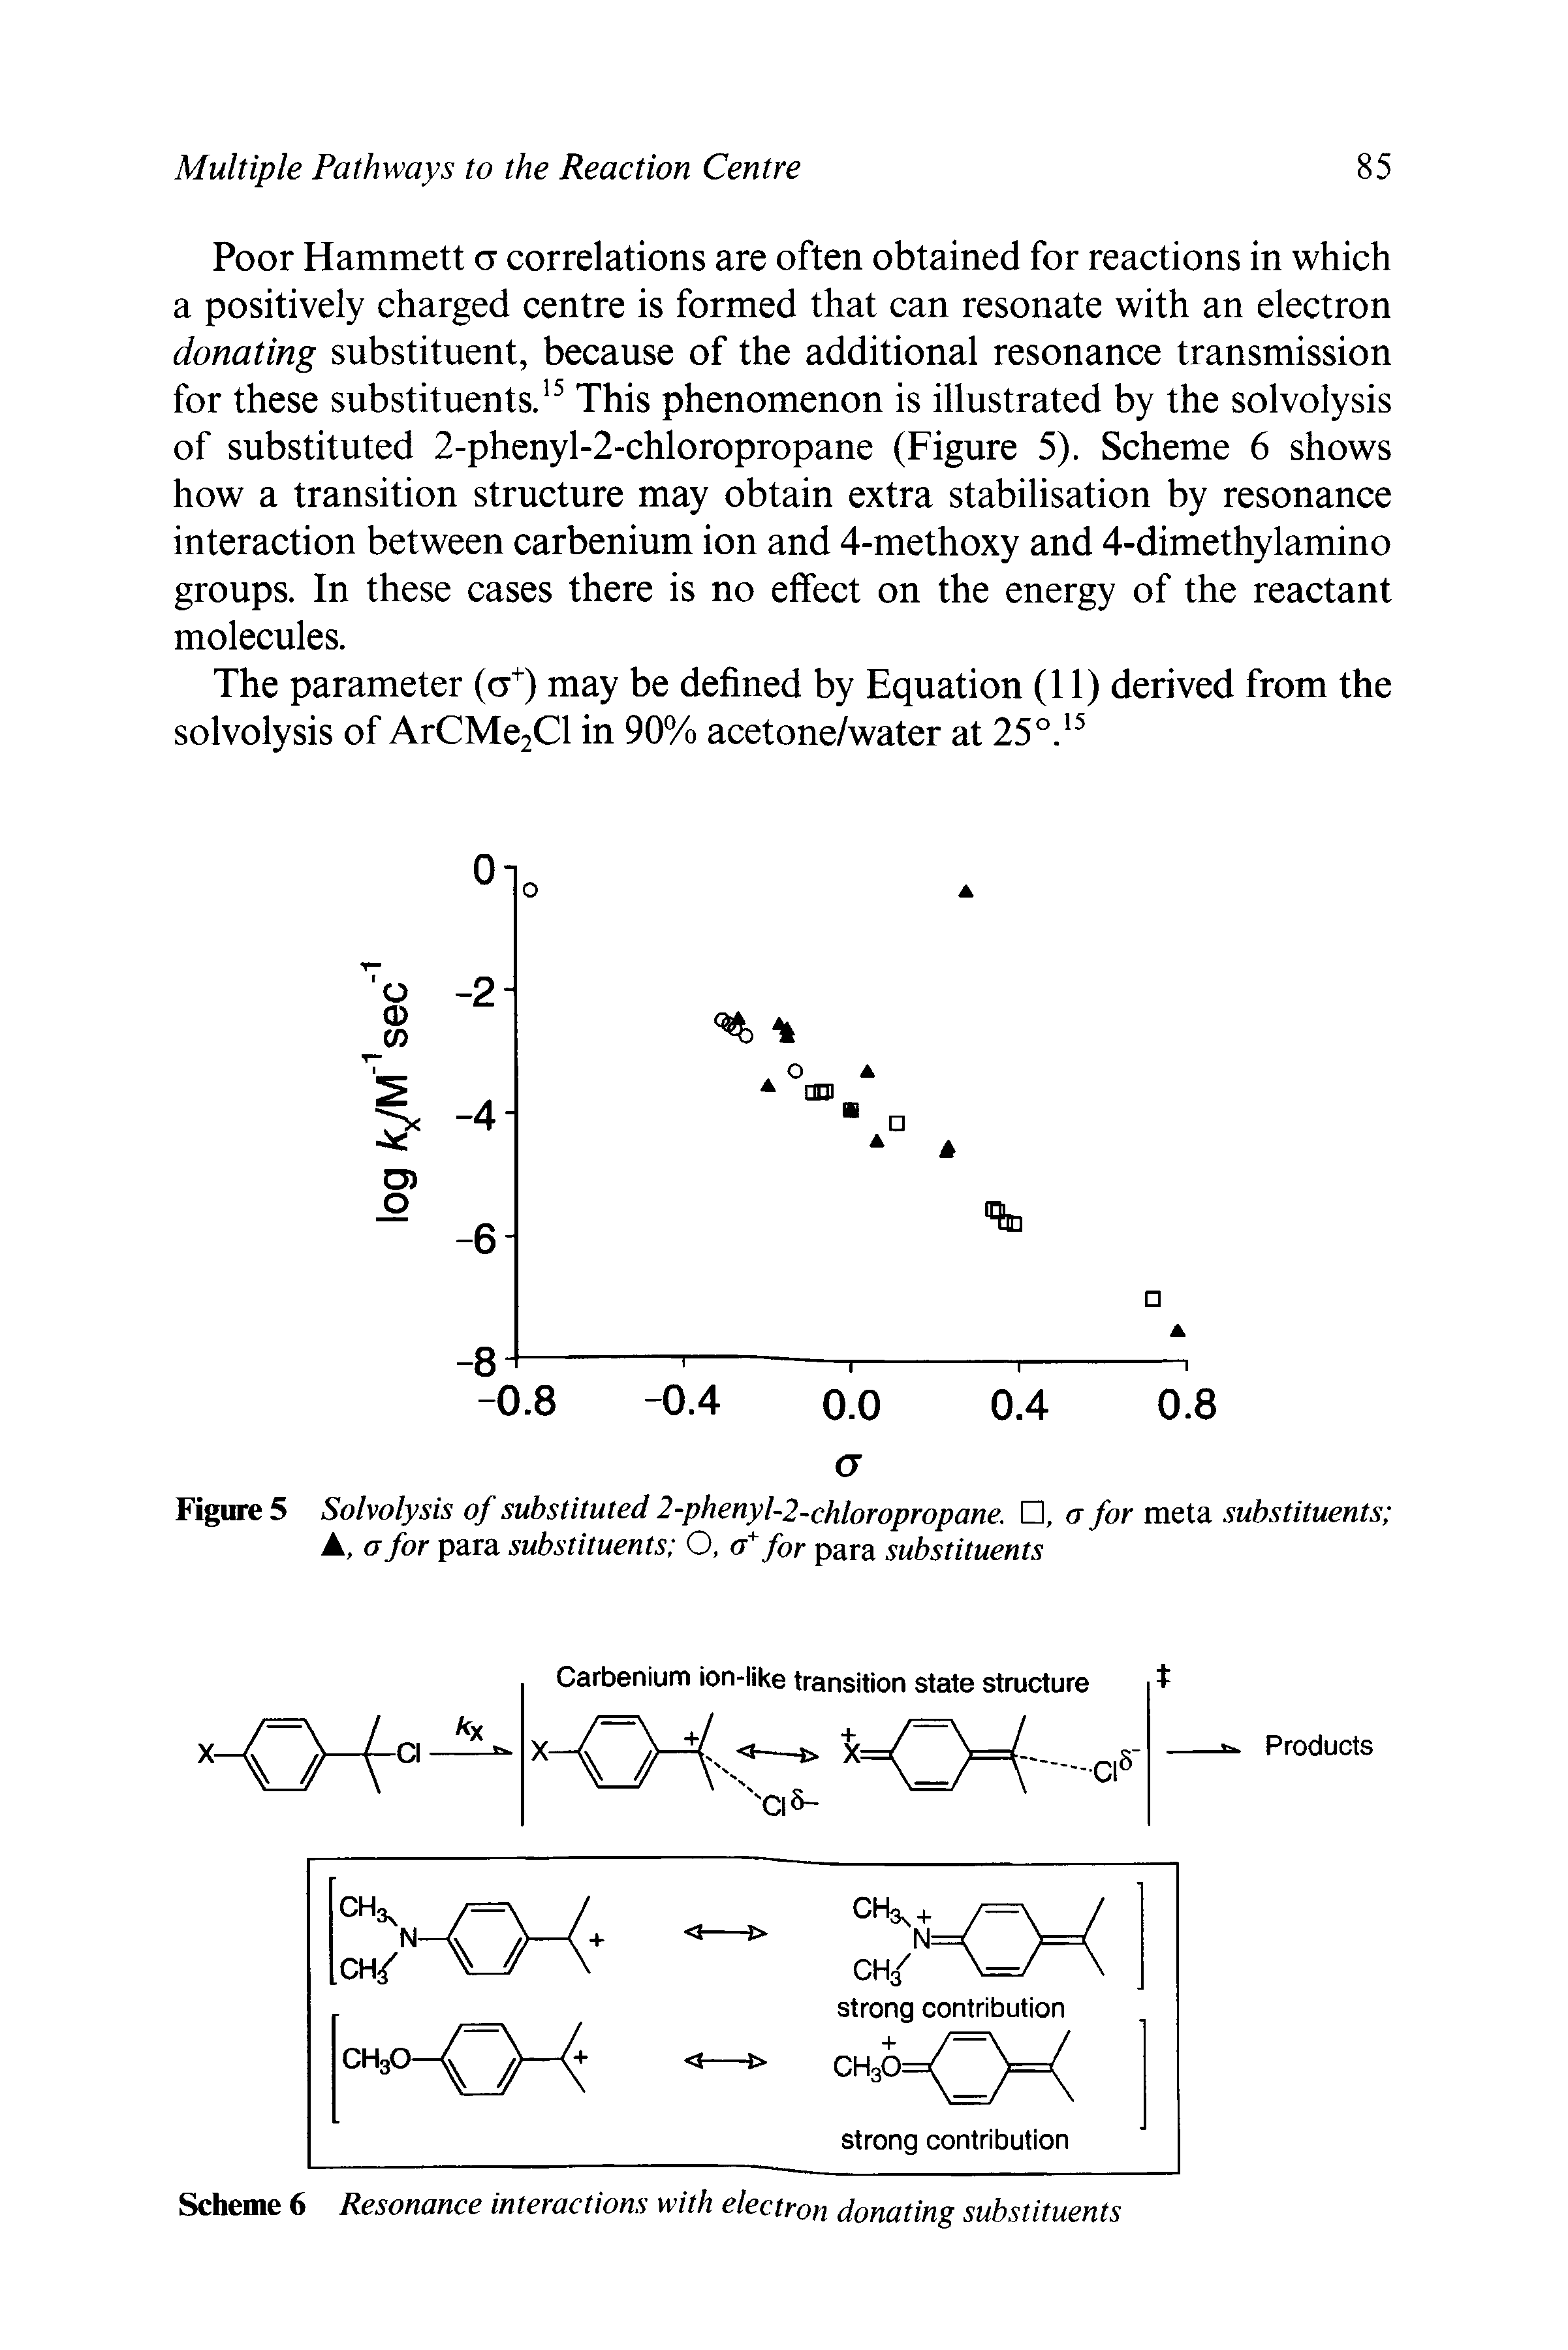 Figure 5 Solvolysis of substituted 2-phenyl-2-chloropropane. , a for meta substituents k, a for para substituents O, a for para substituents...